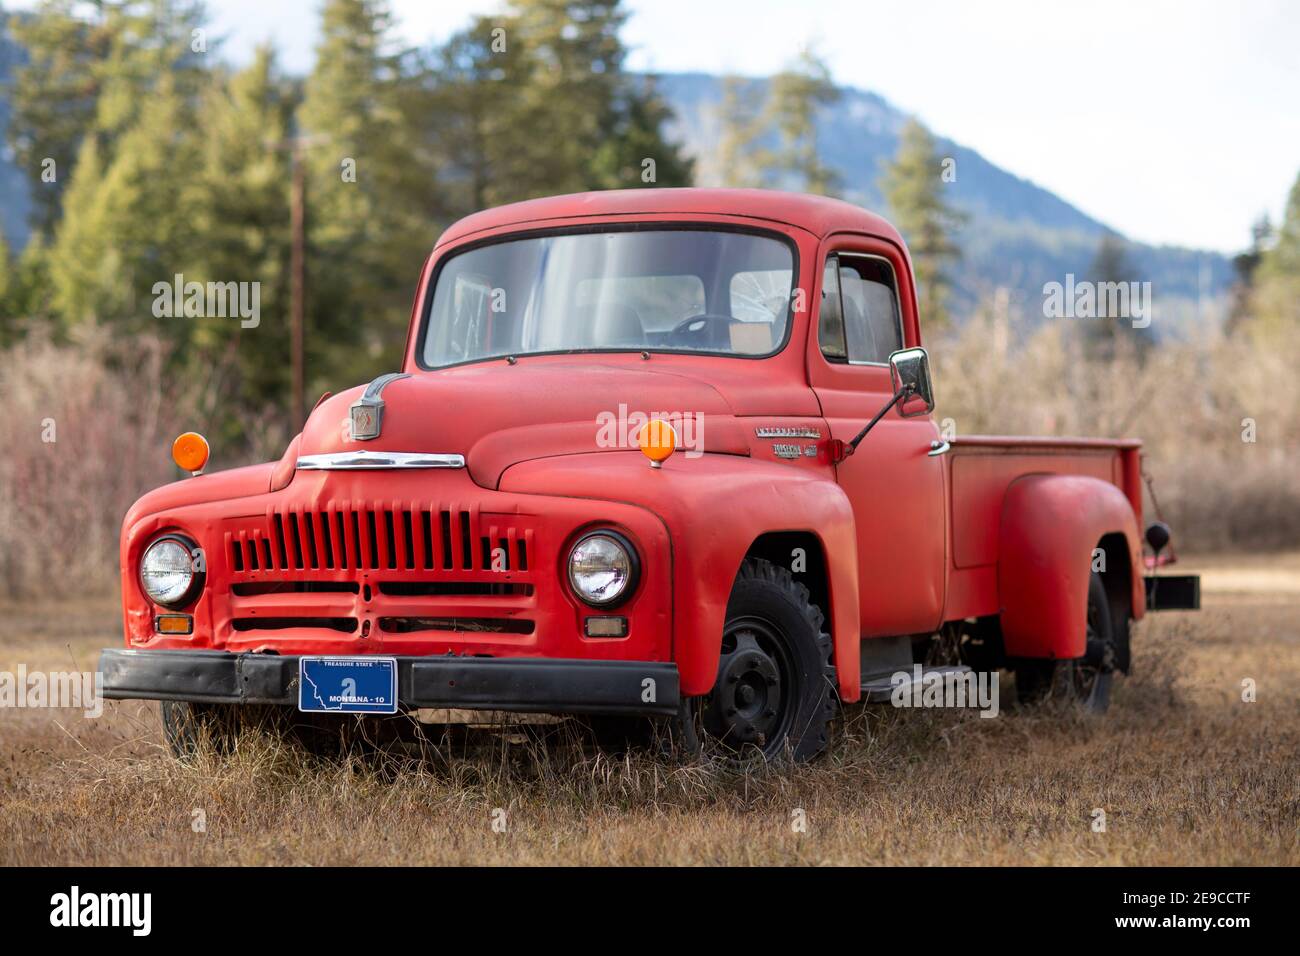 A 1952 International L130 pickup truck, in Troy, Montana.   International L Series trucks were produced by International Harvester from 1949 to 1952. Stock Photo